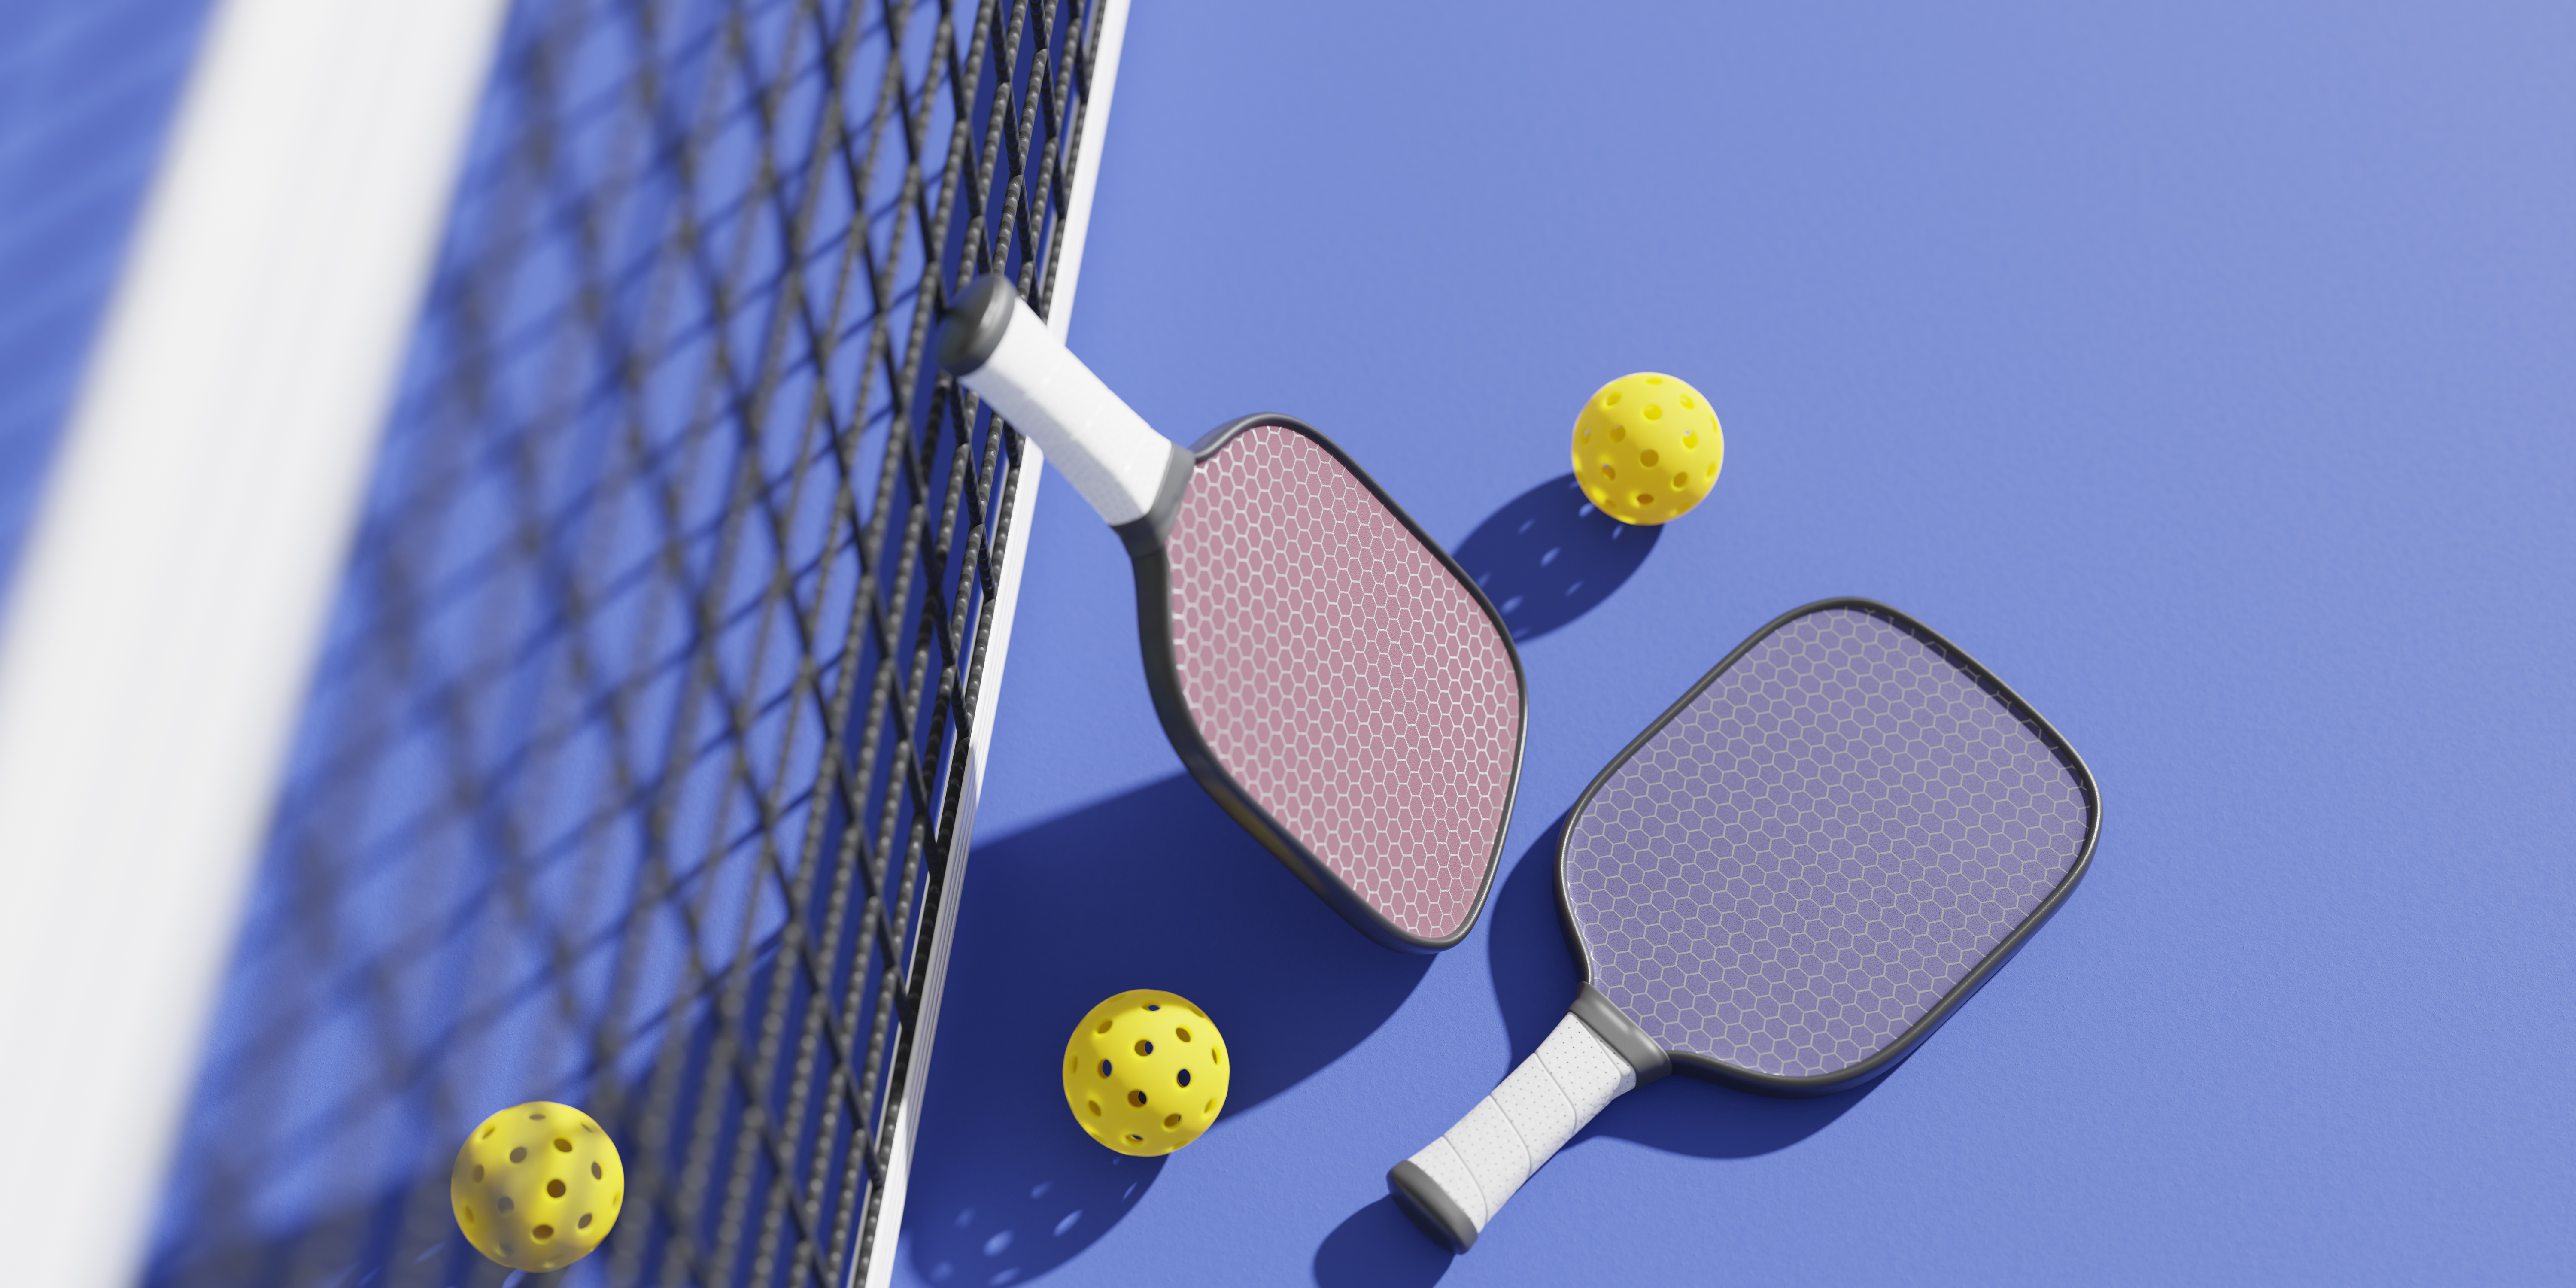 More indoor pickleball options are coming to the northwest suburbs